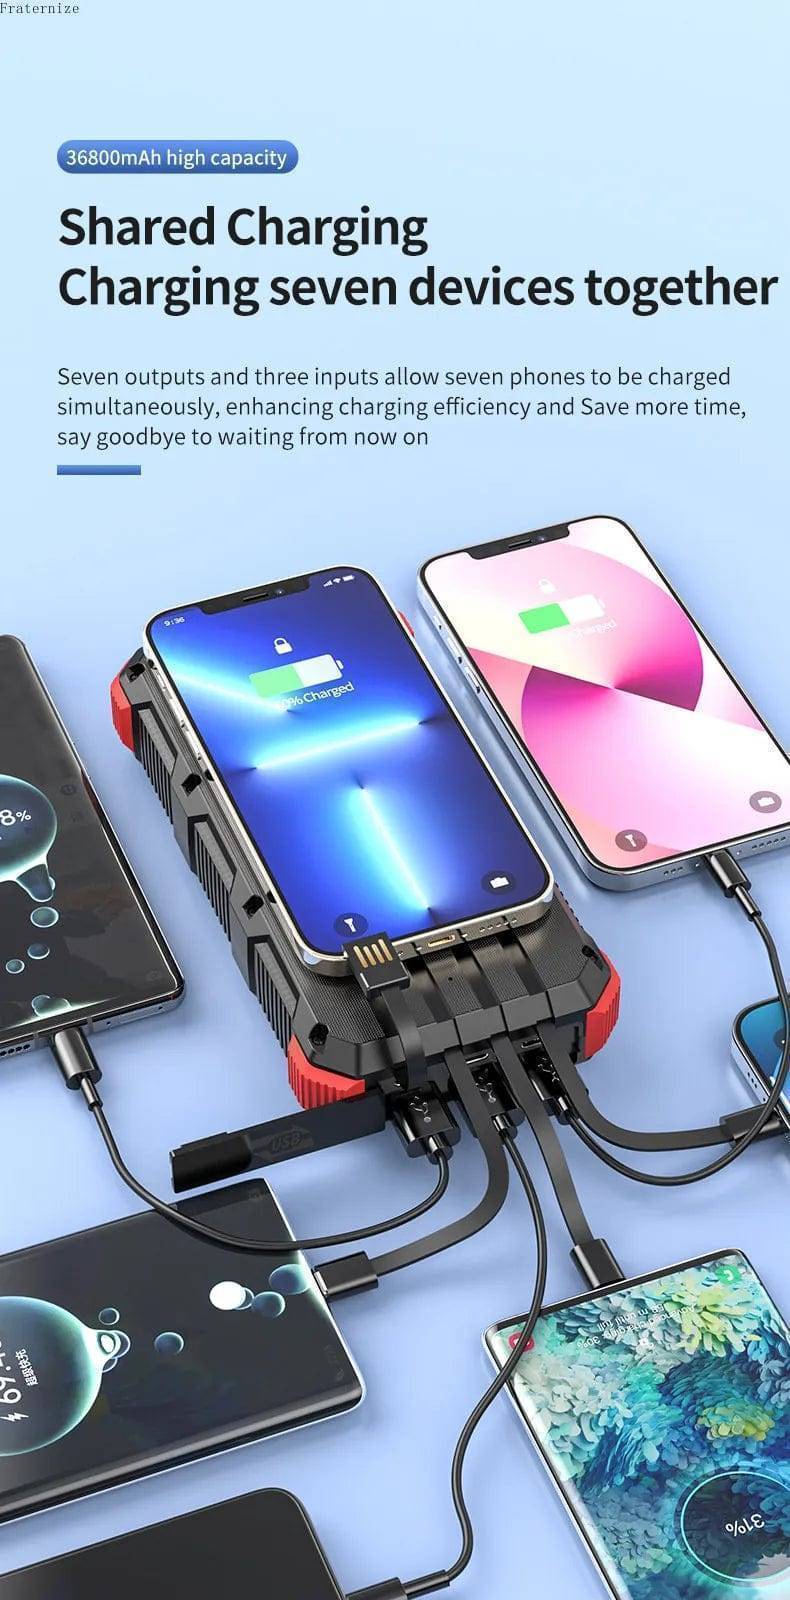 Efficient and Reliable 36800mAh Portable Wireless Quick Charger - Never Run Out of Power Again9